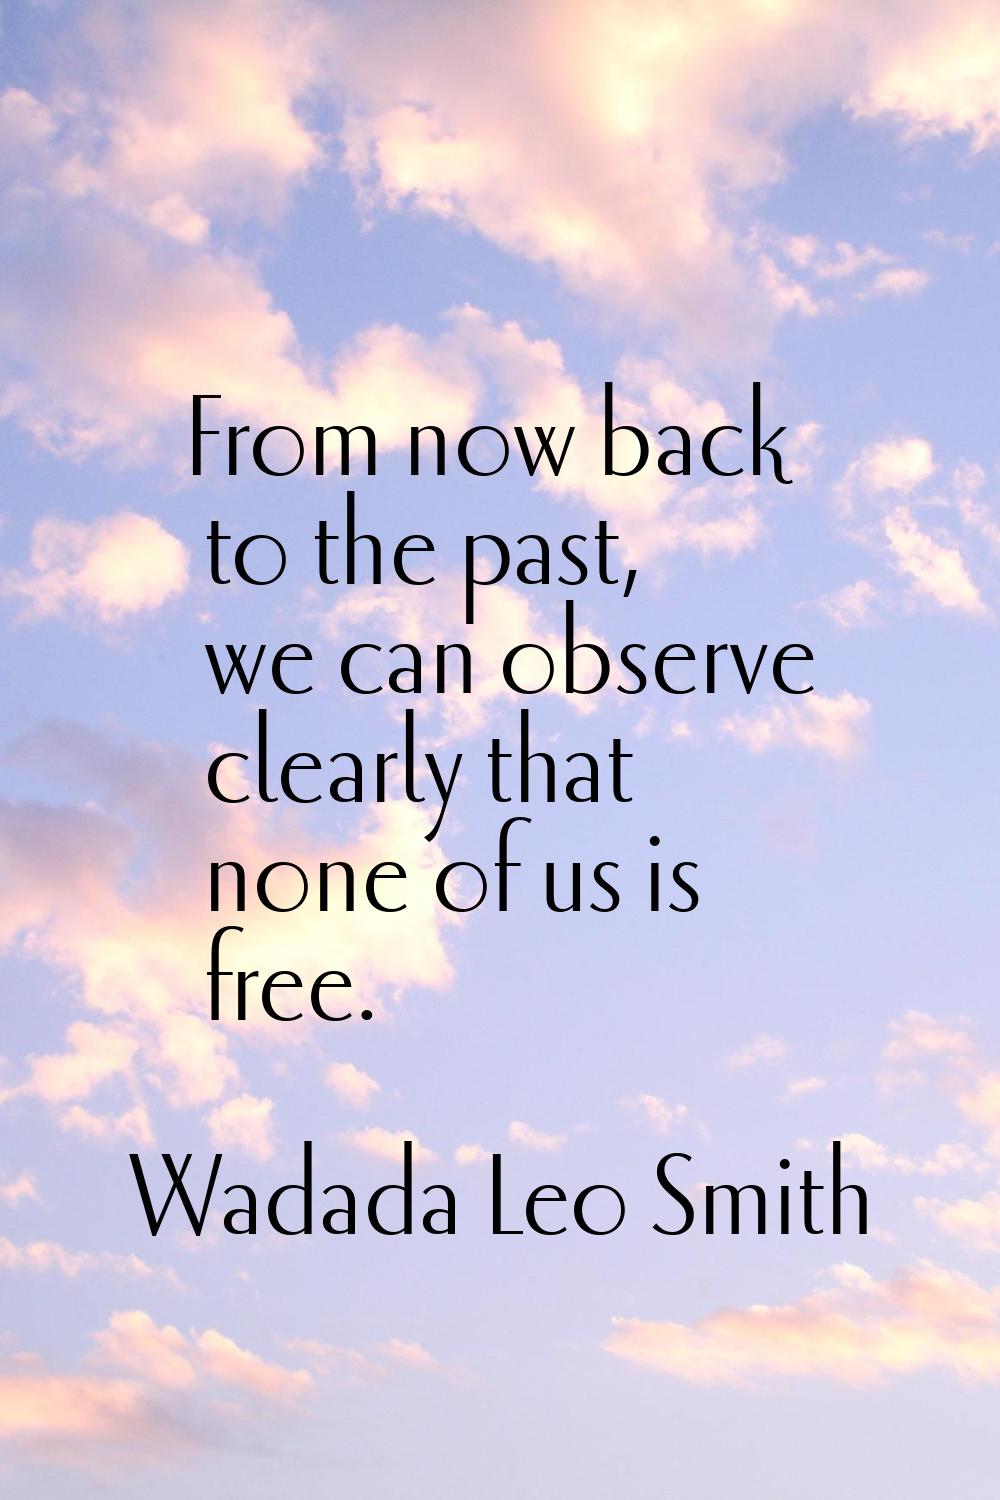 From now back to the past, we can observe clearly that none of us is free.